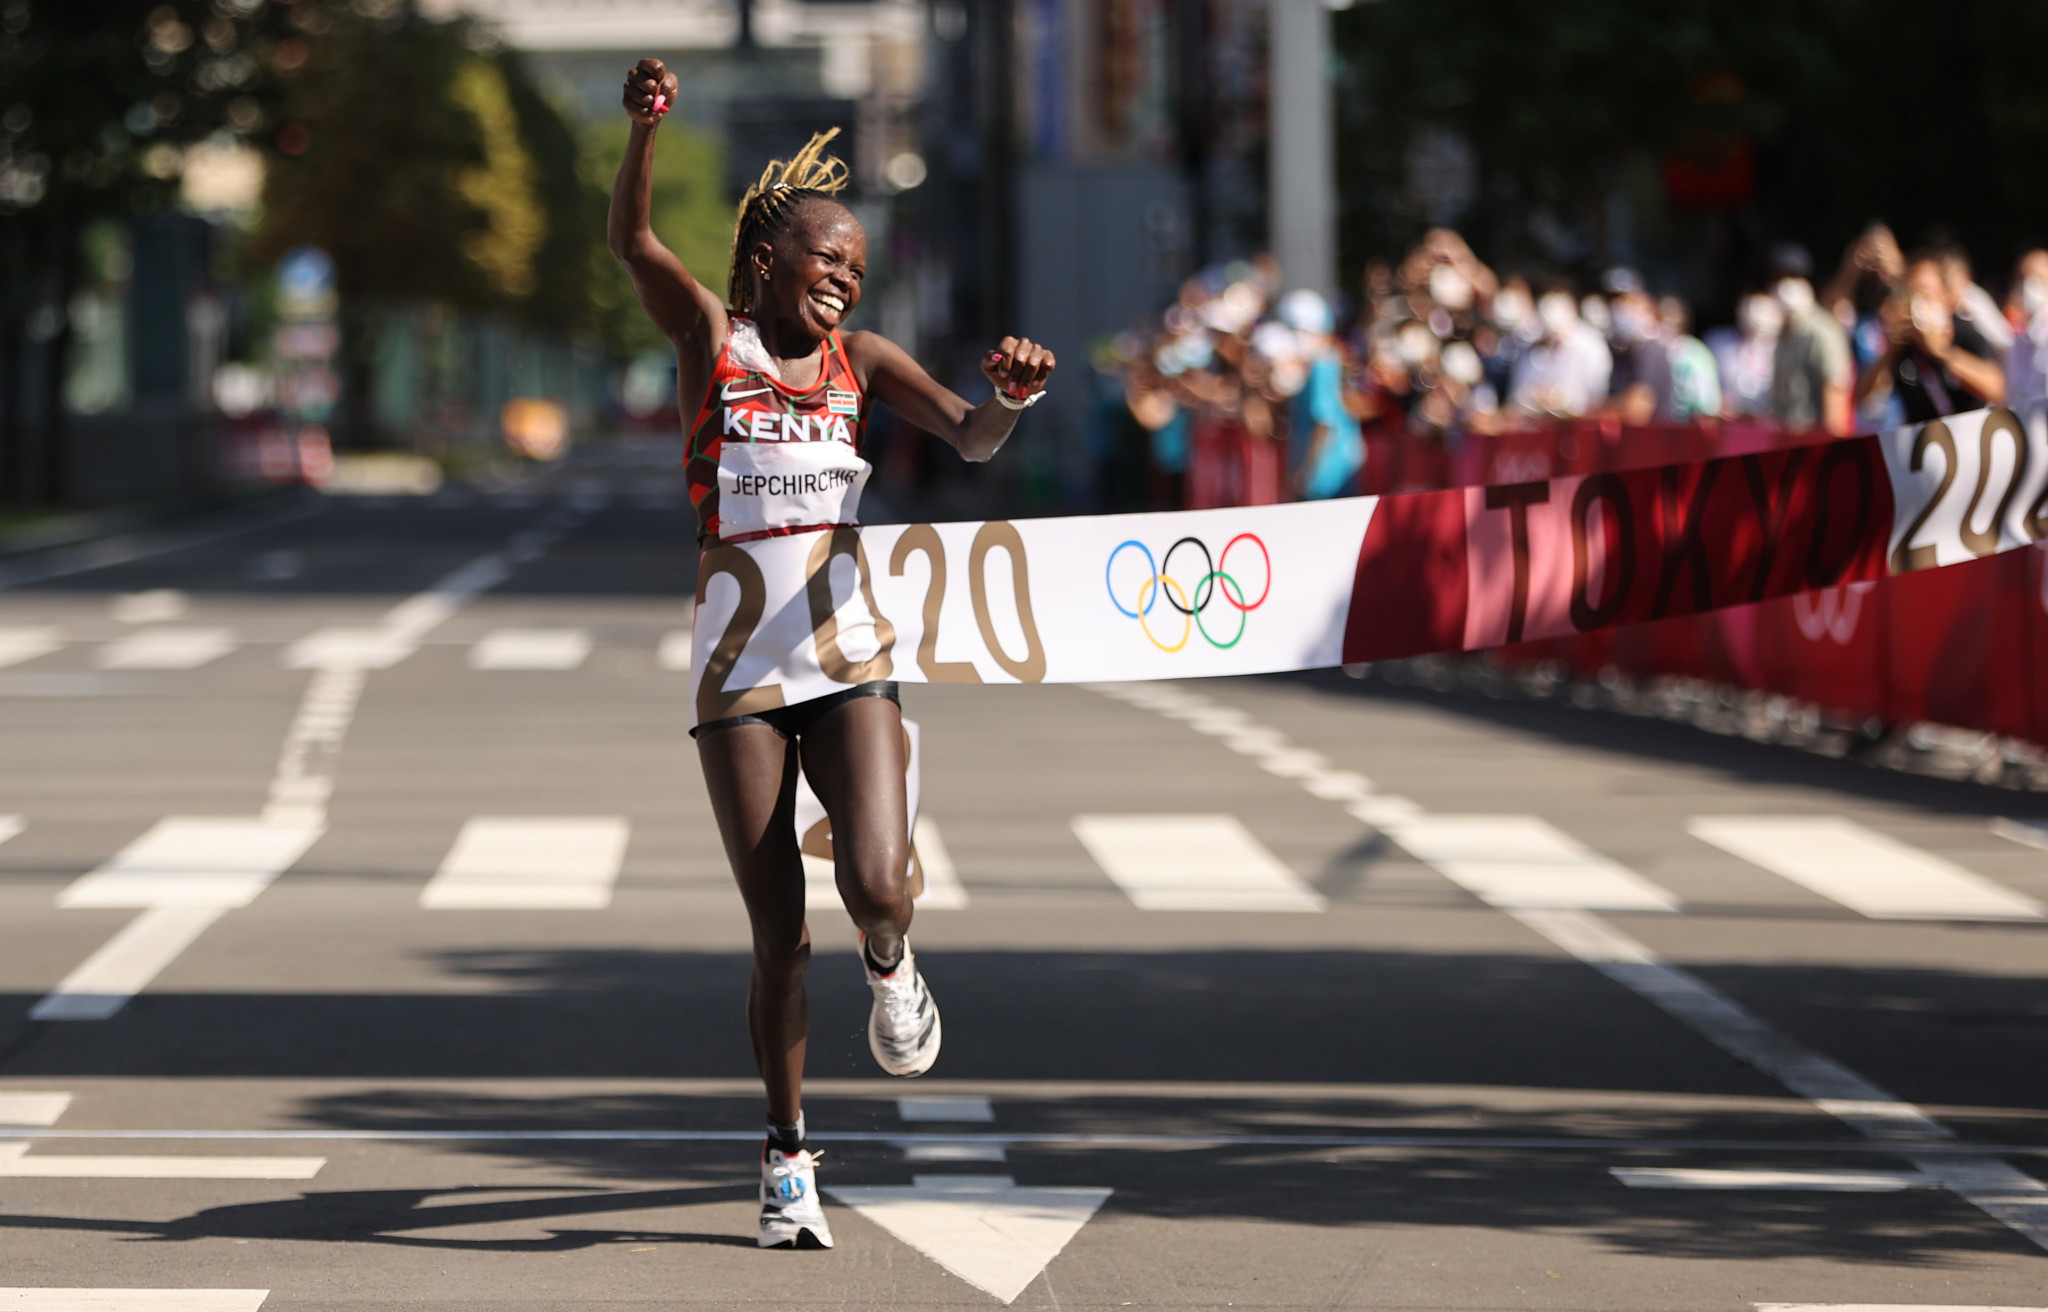 Kenya's Peres Jepchirchir arrives in New York City having triumphed at the Tokyo 2020 Olympic Games this summer ©Getty Images